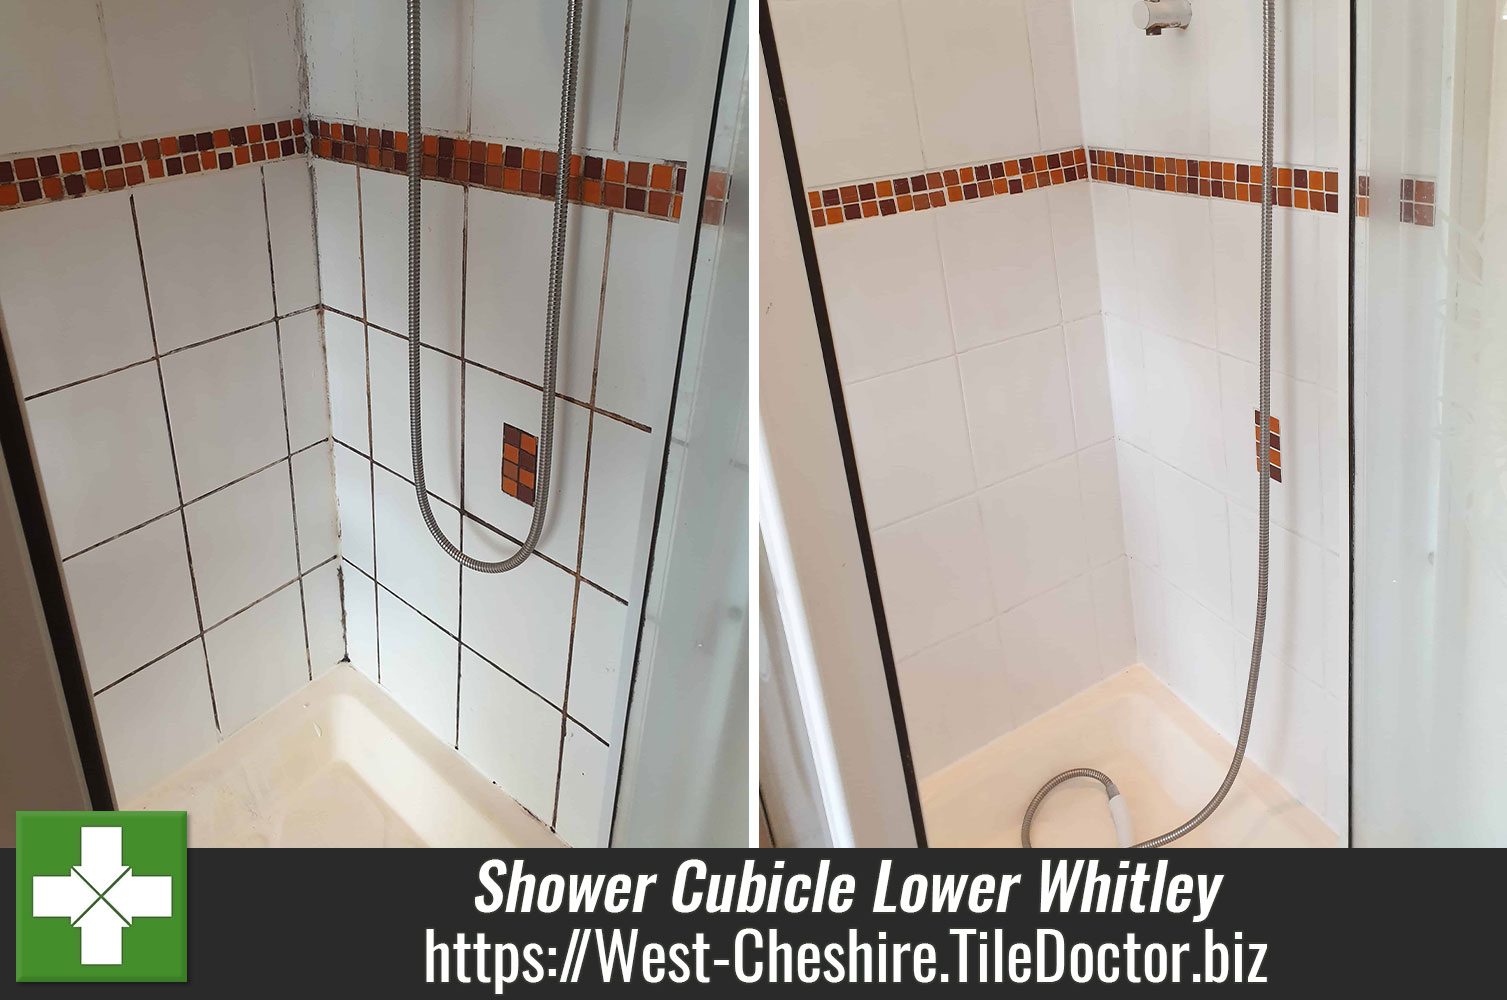 Deep Cleaning Shower Tile Grout with Oxy-Gel in Lower Whitley Cheshire